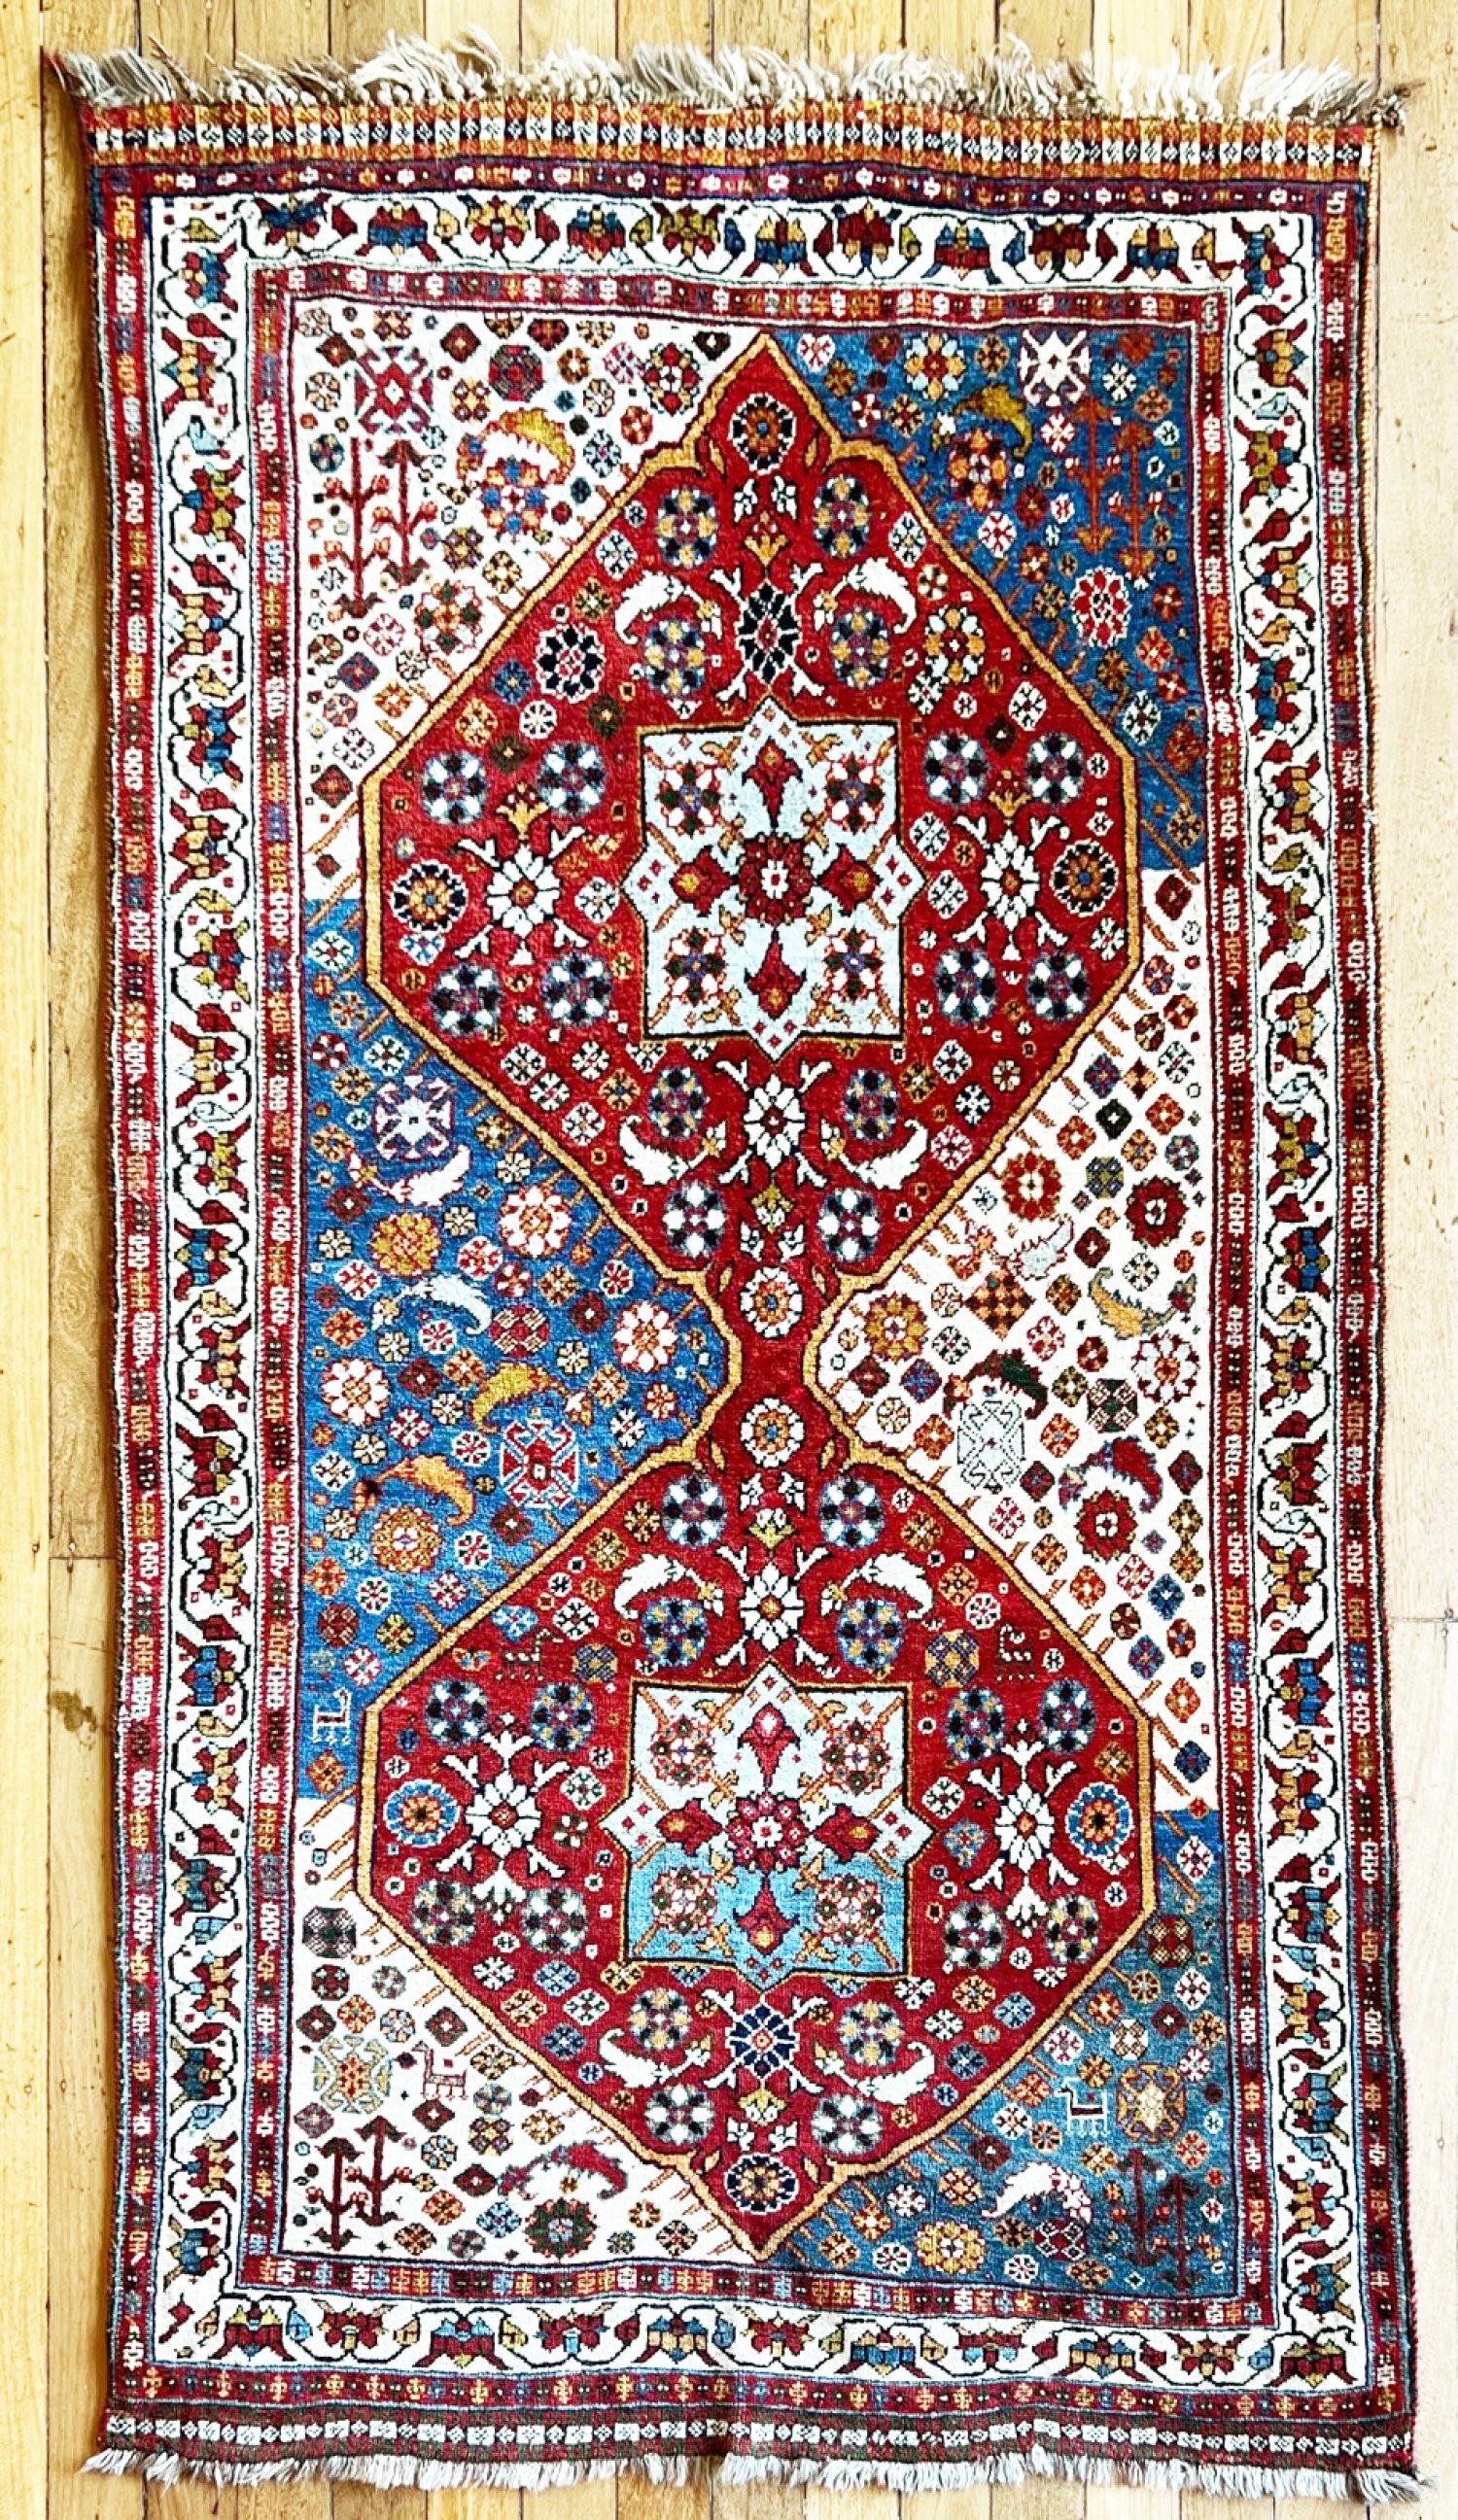 Qashqa’i rug from southern Persia, 